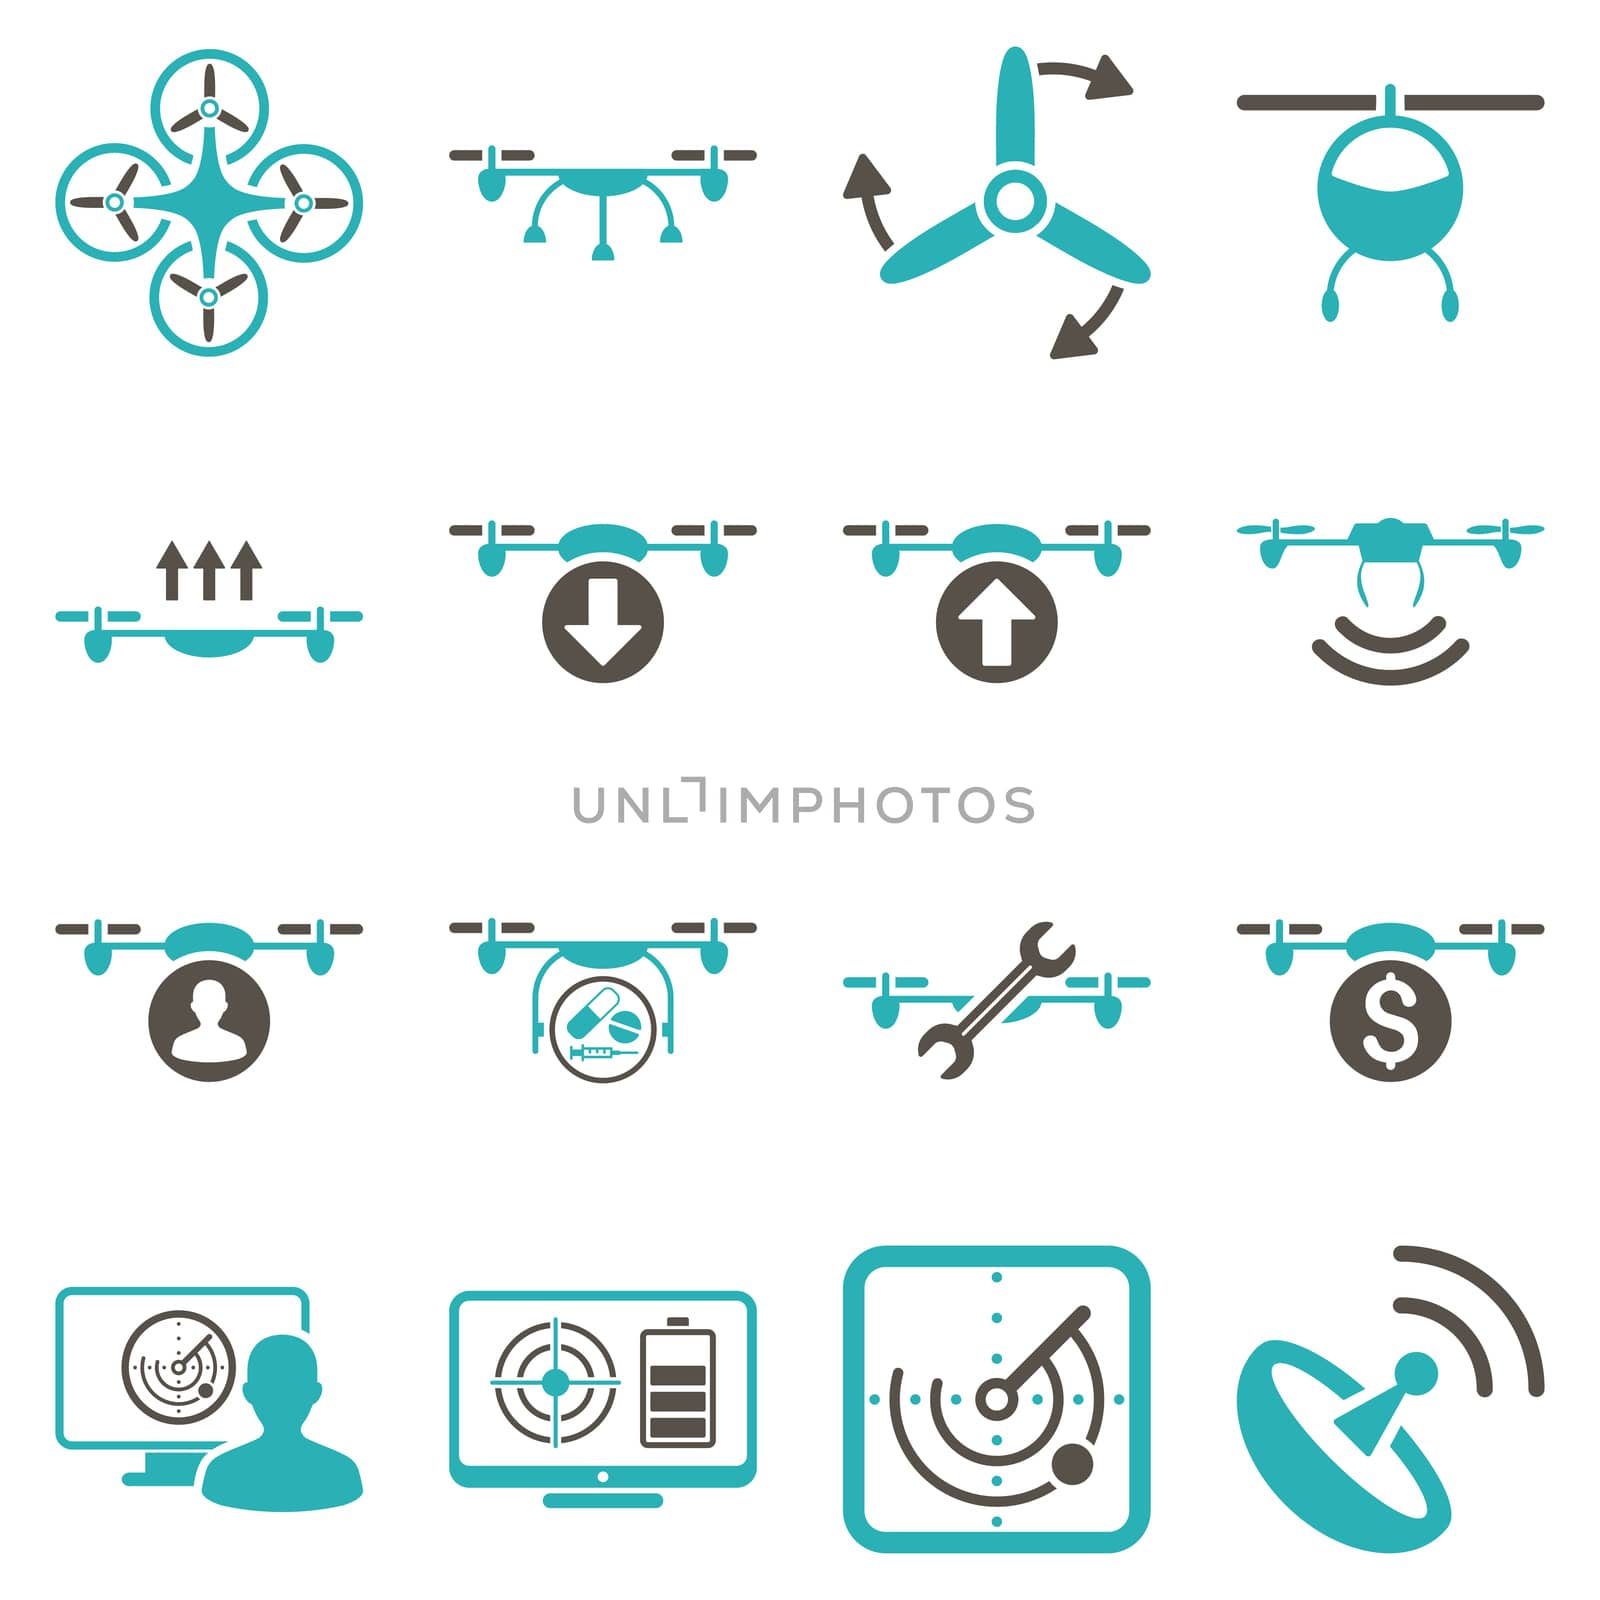 Quadcopter service icon set designed with grey and cyan colors. These flat bicolor pictograms are isolated on a white background.